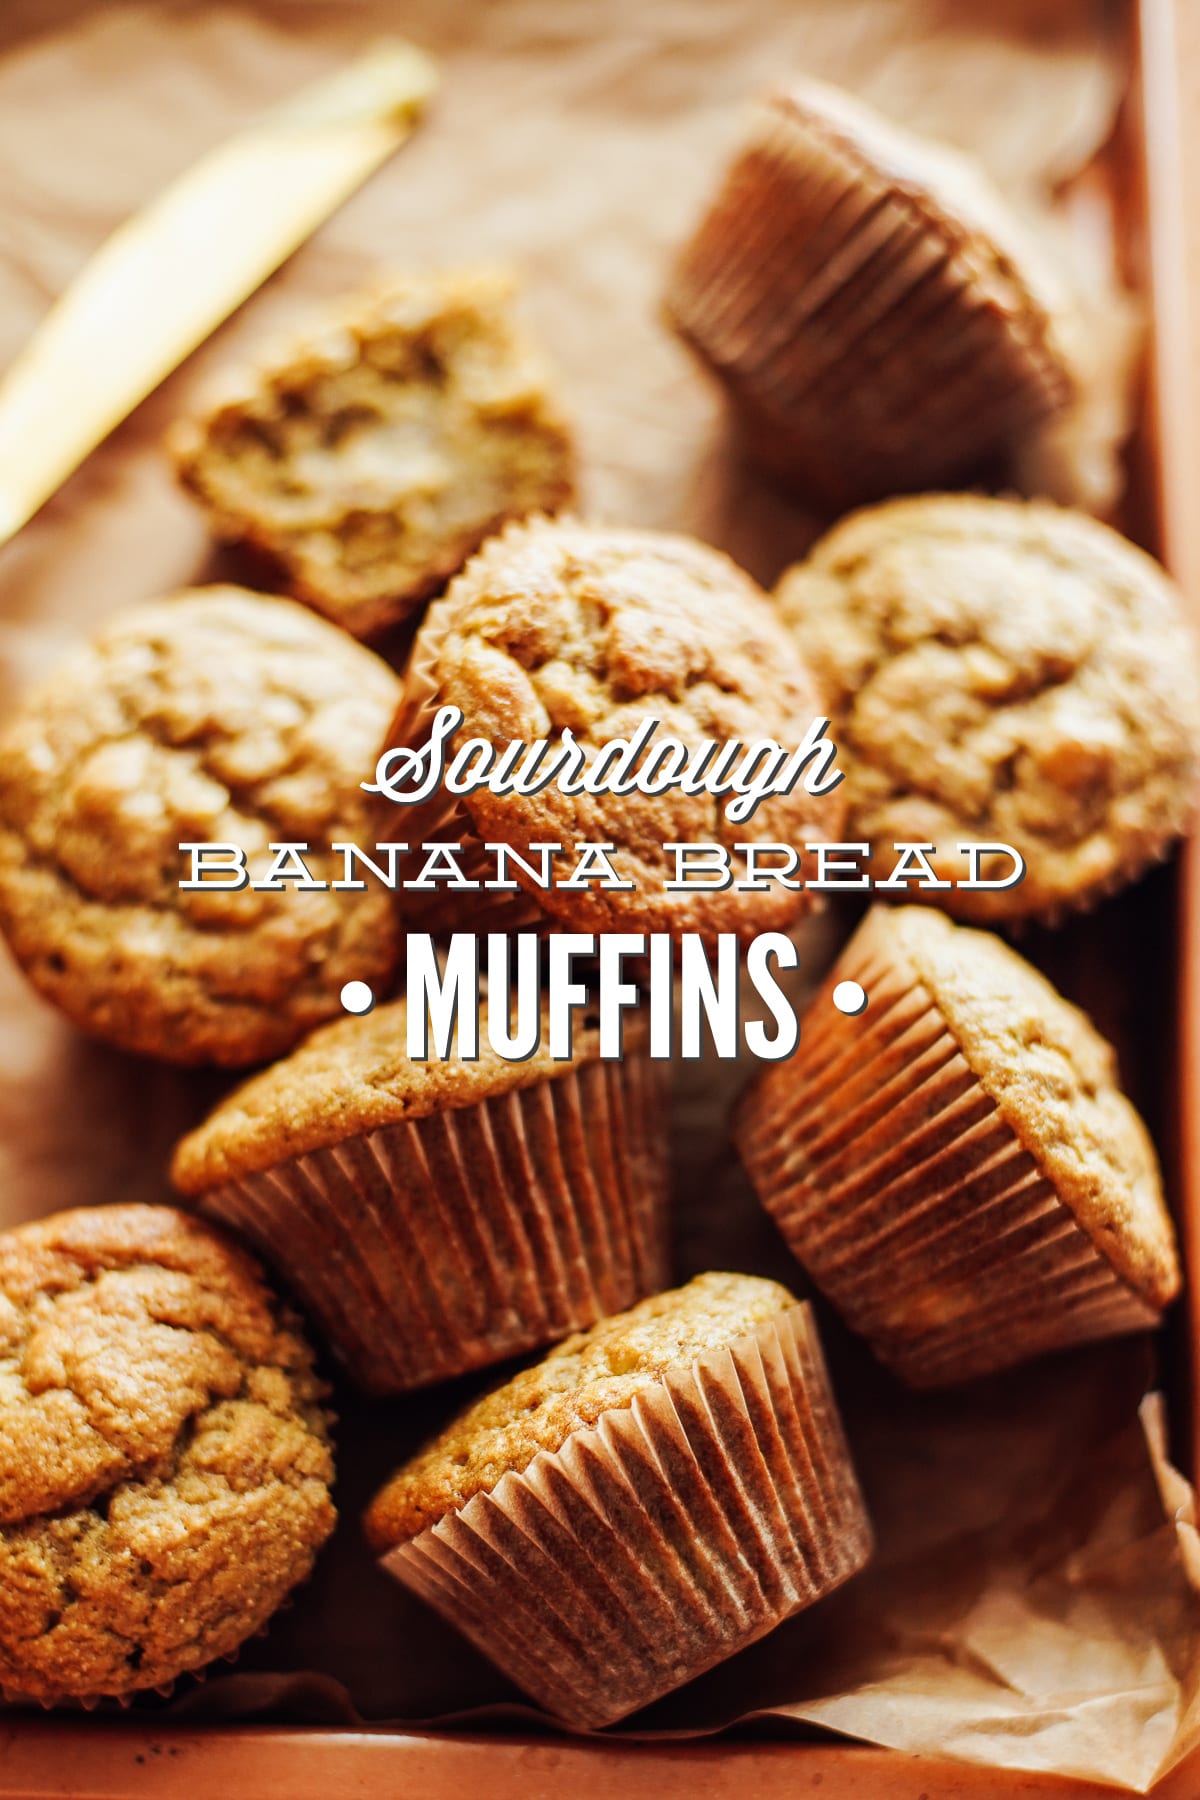 Sourdough Banana Bread Muffins (with honey or maple syrup)